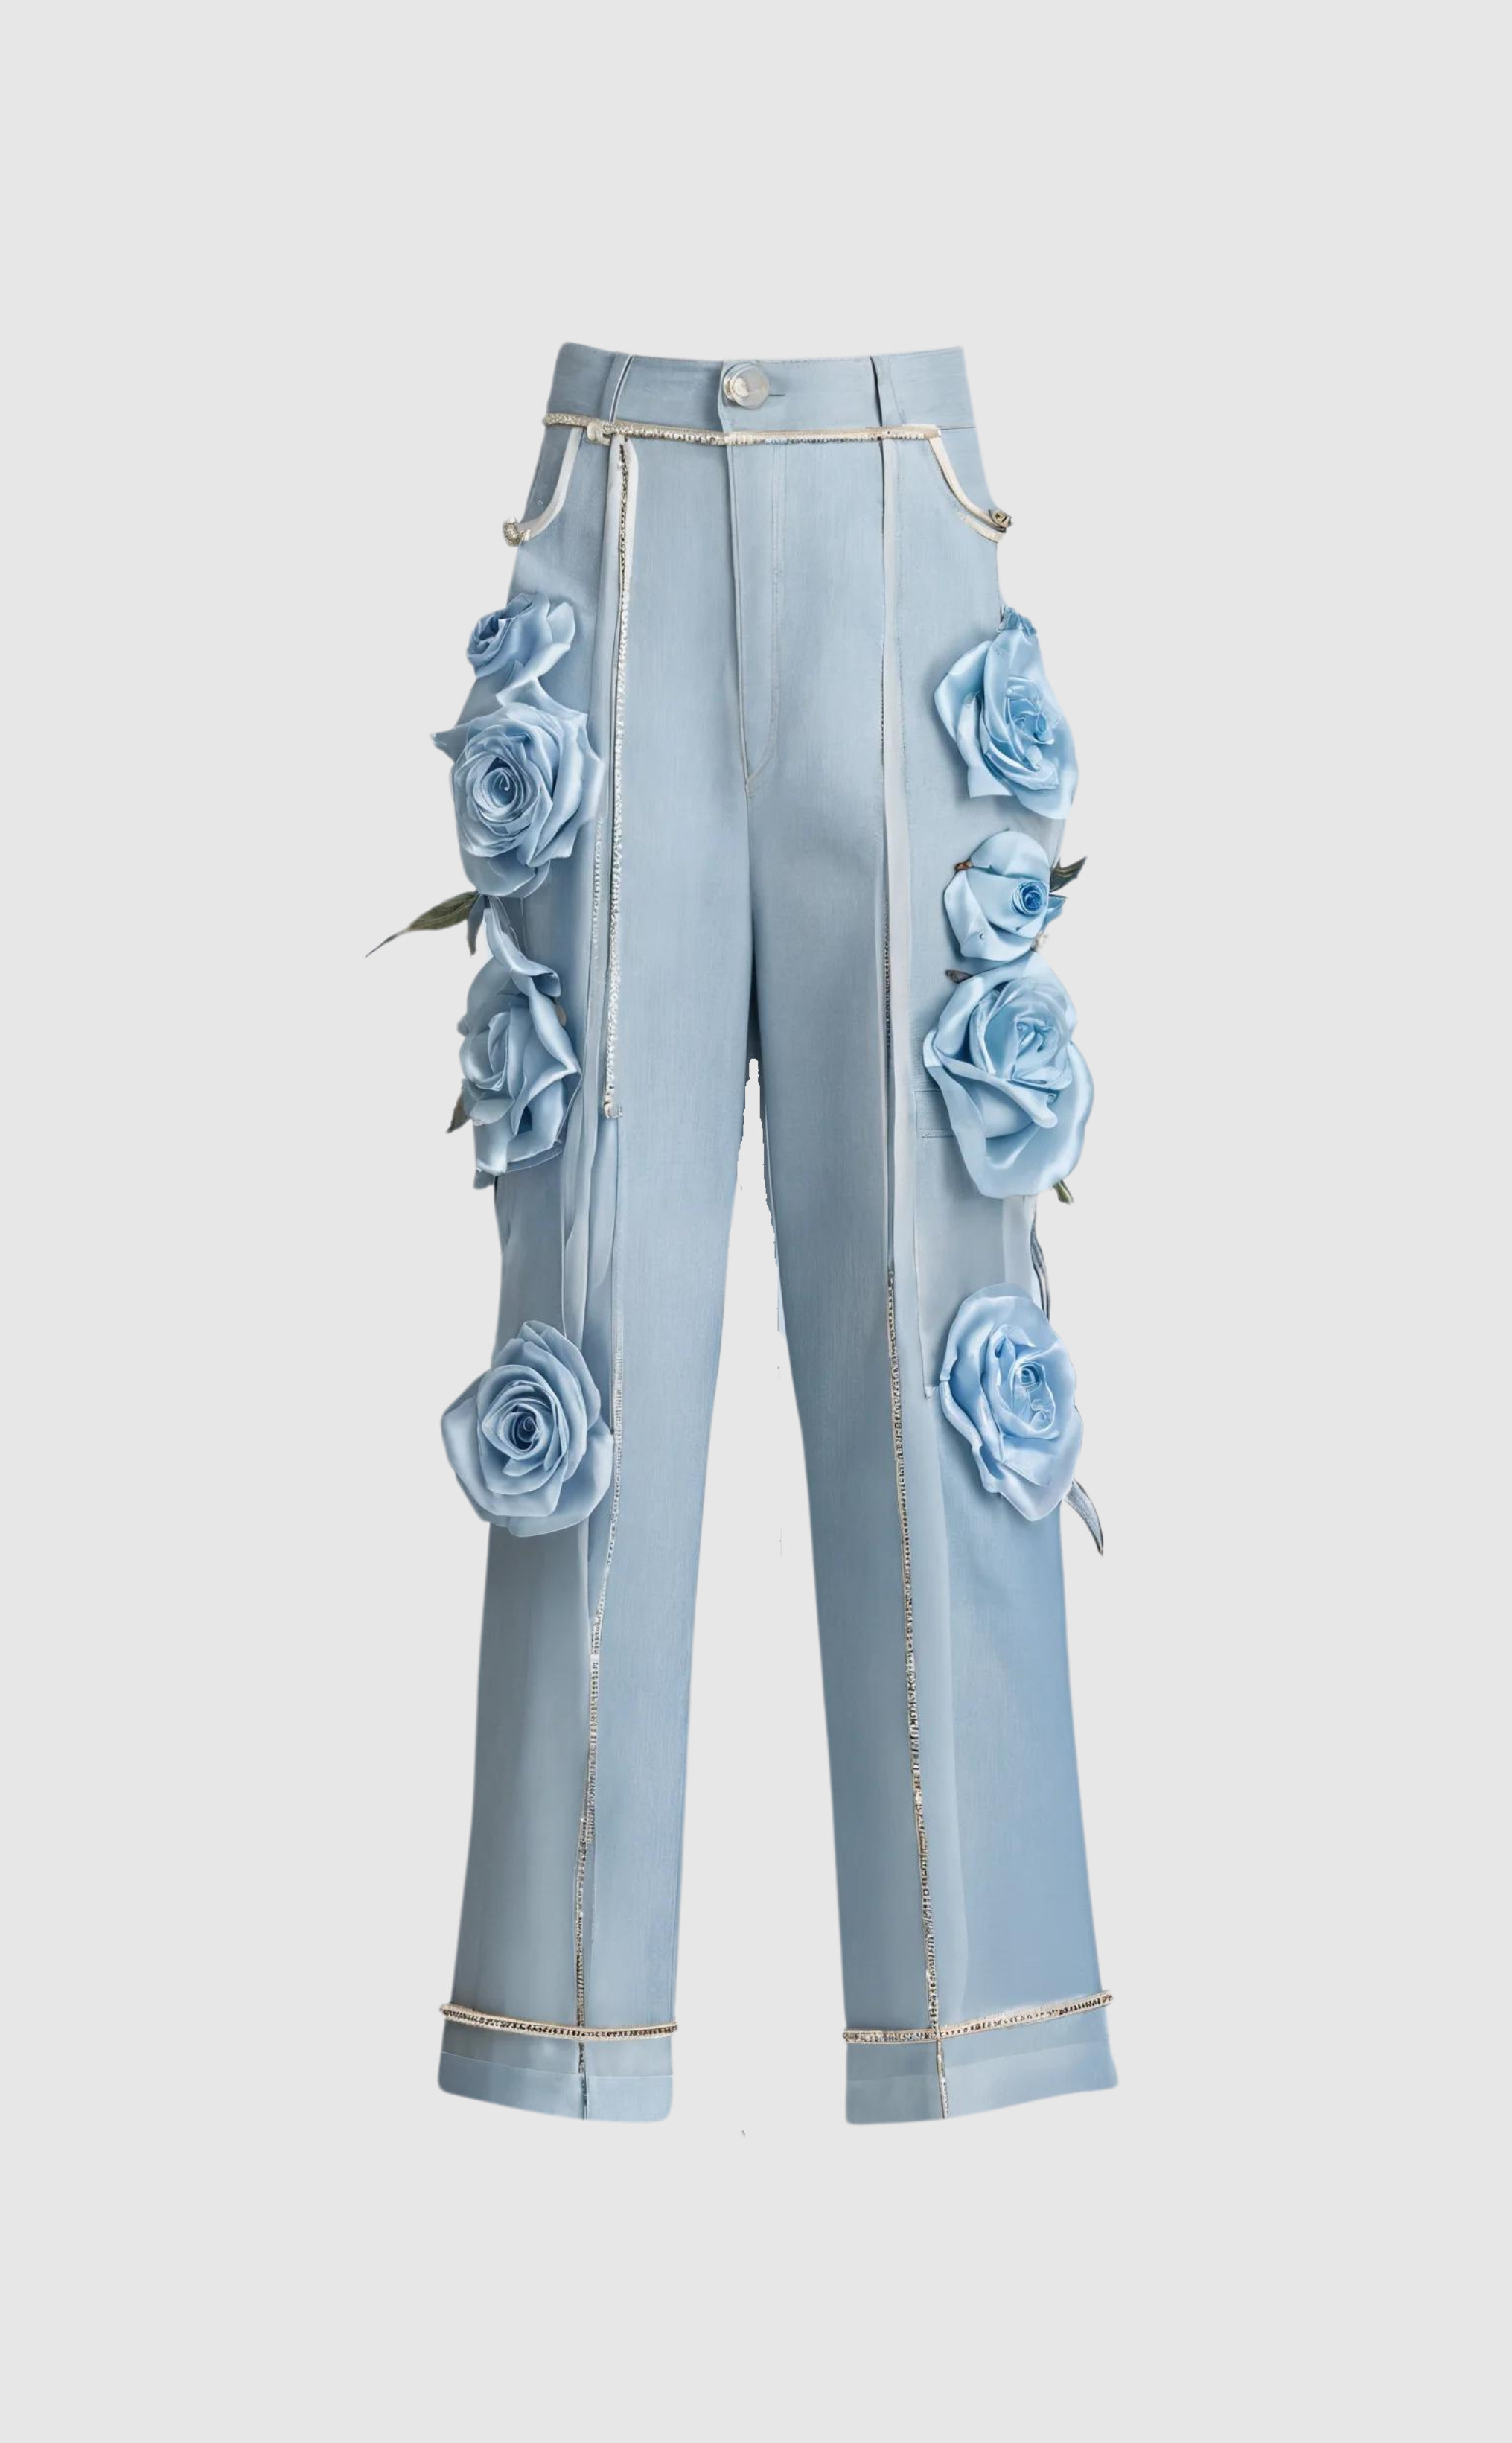 Rose detailed jeans